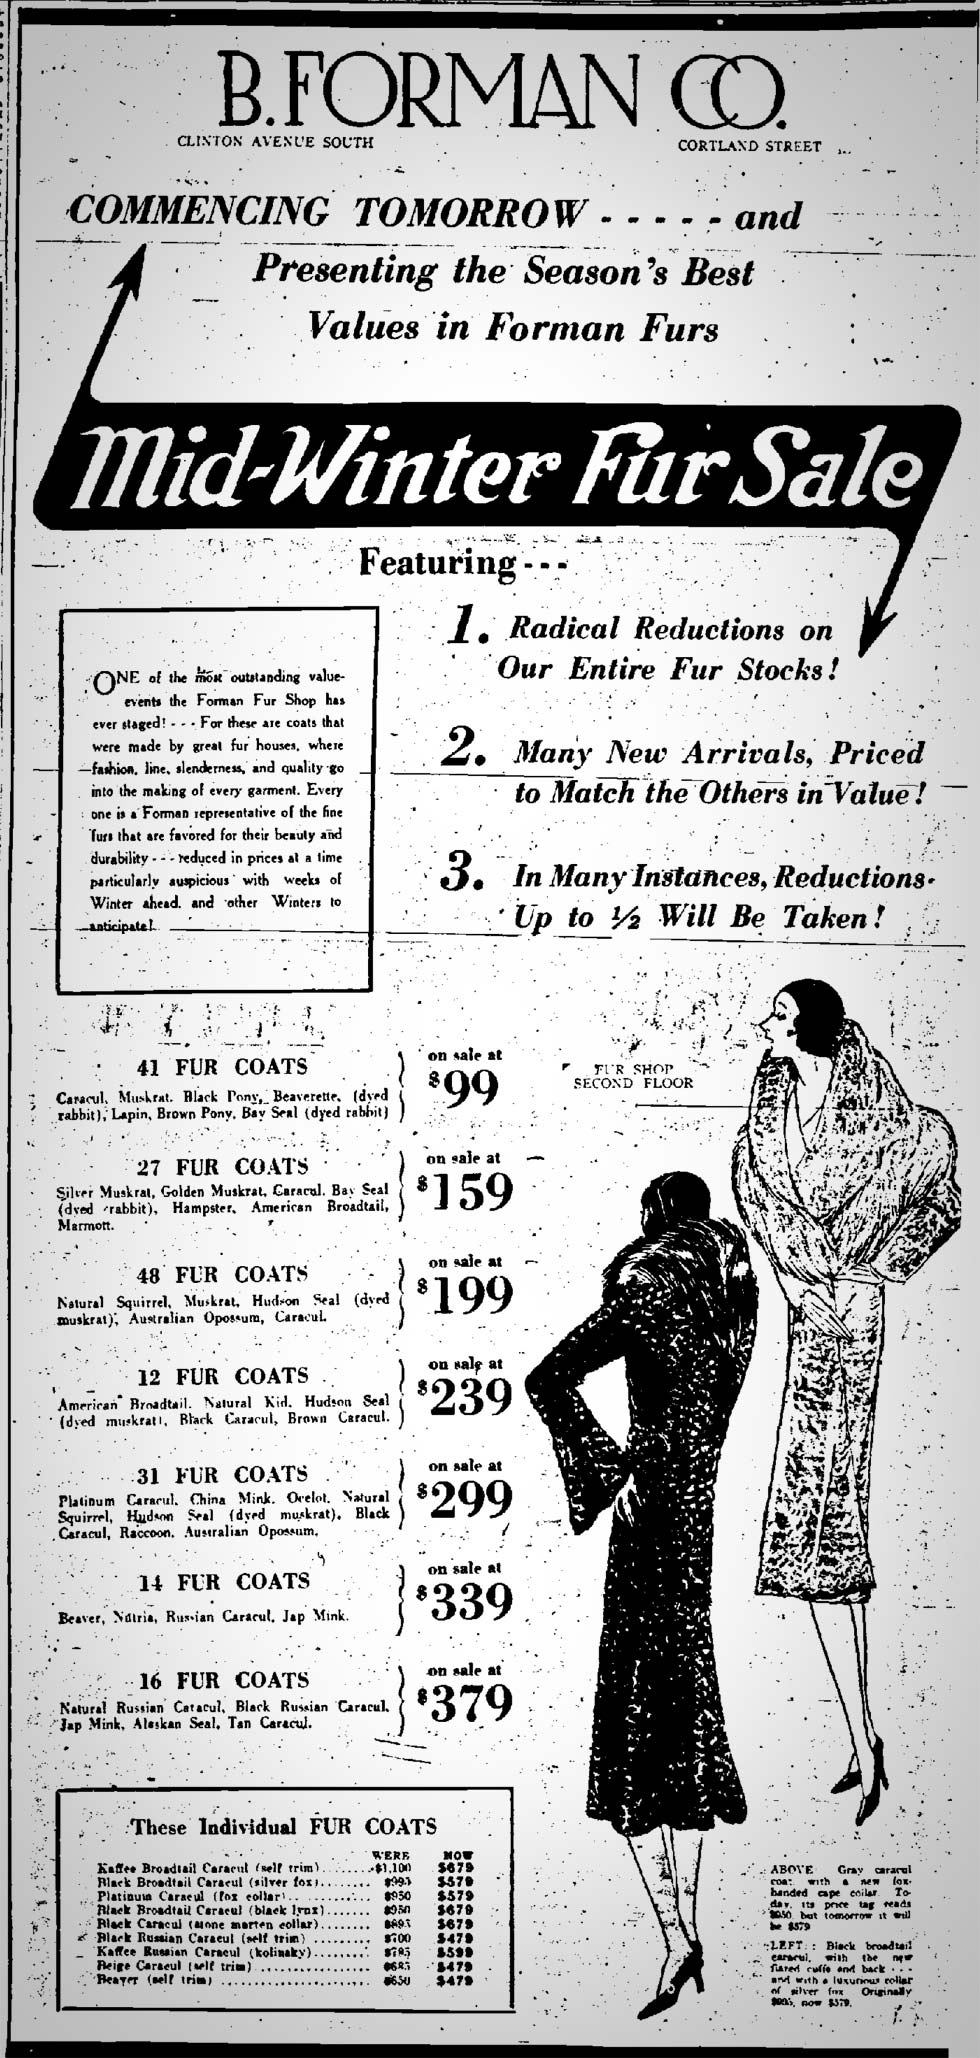 B. Forman Co. advertisment in the Democrat and Chronicle, December 25, 1929. [SOURCE: FultonHistory.com]